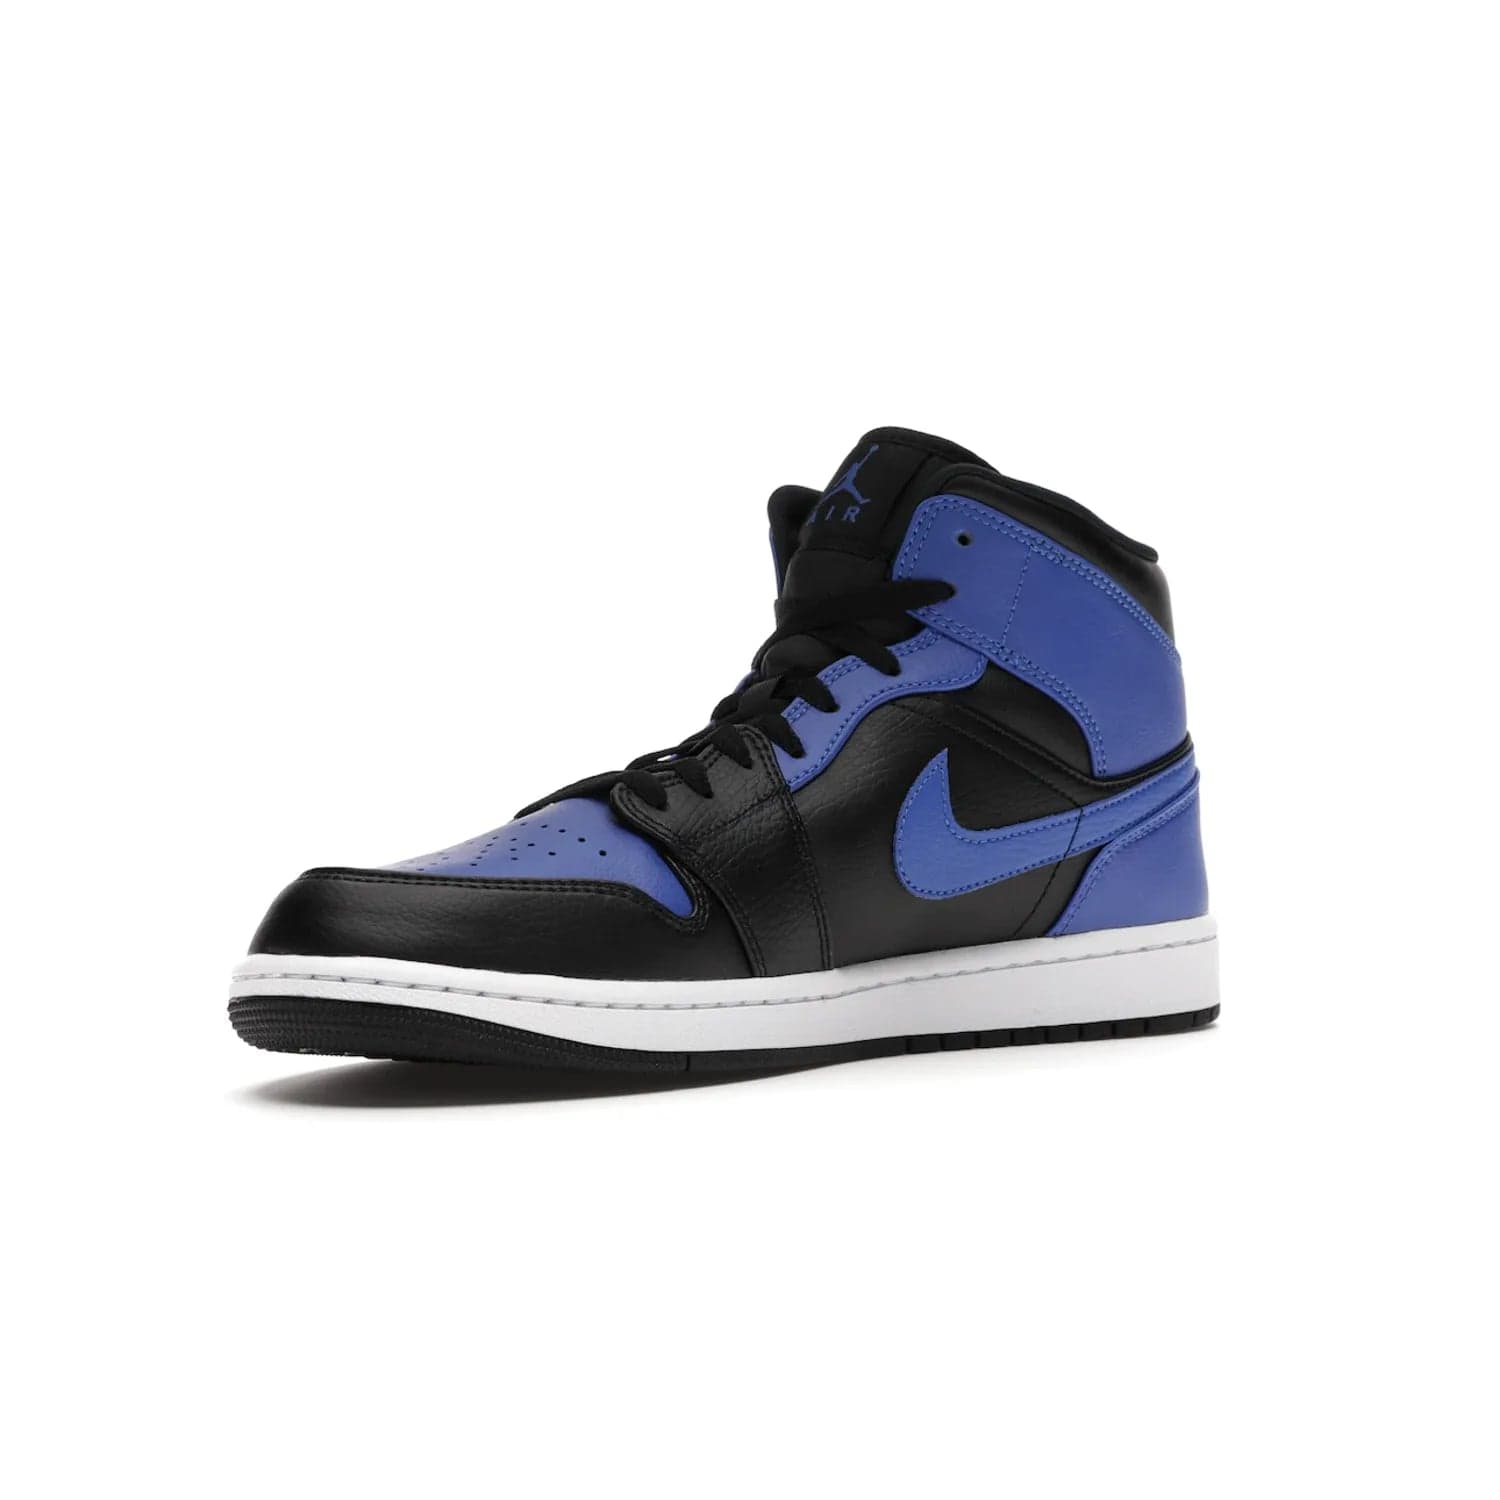 Jordan 1 Mid Hyper Royal Tumbled Leather - Image 15 - Only at www.BallersClubKickz.com - Iconic colorway of the Air Jordan 1 Mid Black Royal Tumbled Leather. Features a black tumbled leather upper, royal blue leather overlays, white midsole & black rubber outsole. Released December 2020. Adds premium style to any collection.